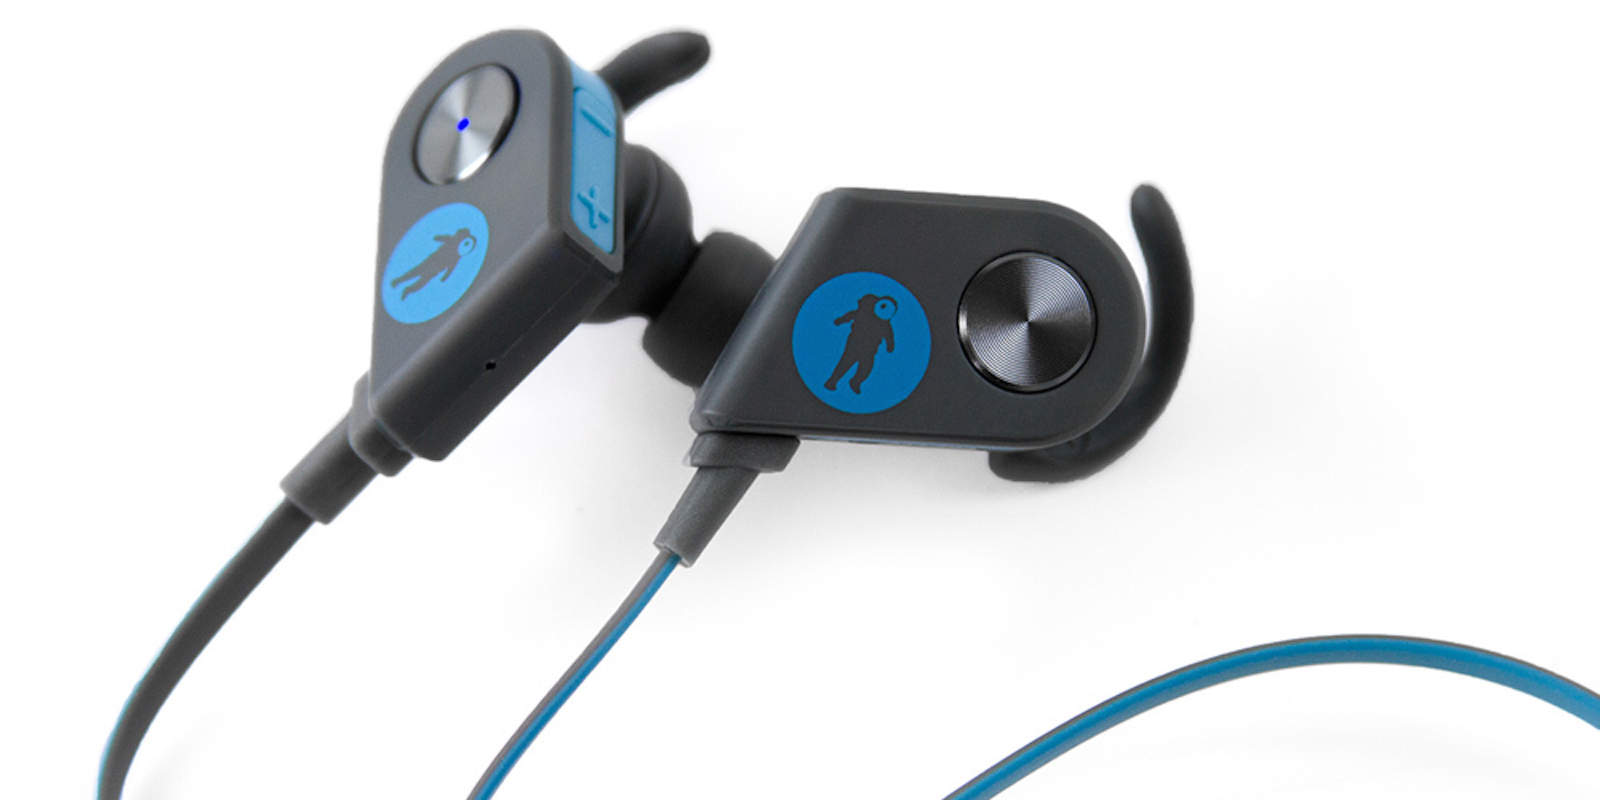 The latest version of FRESHeBUDS's popular earbuds sound better and last longer than ever before.